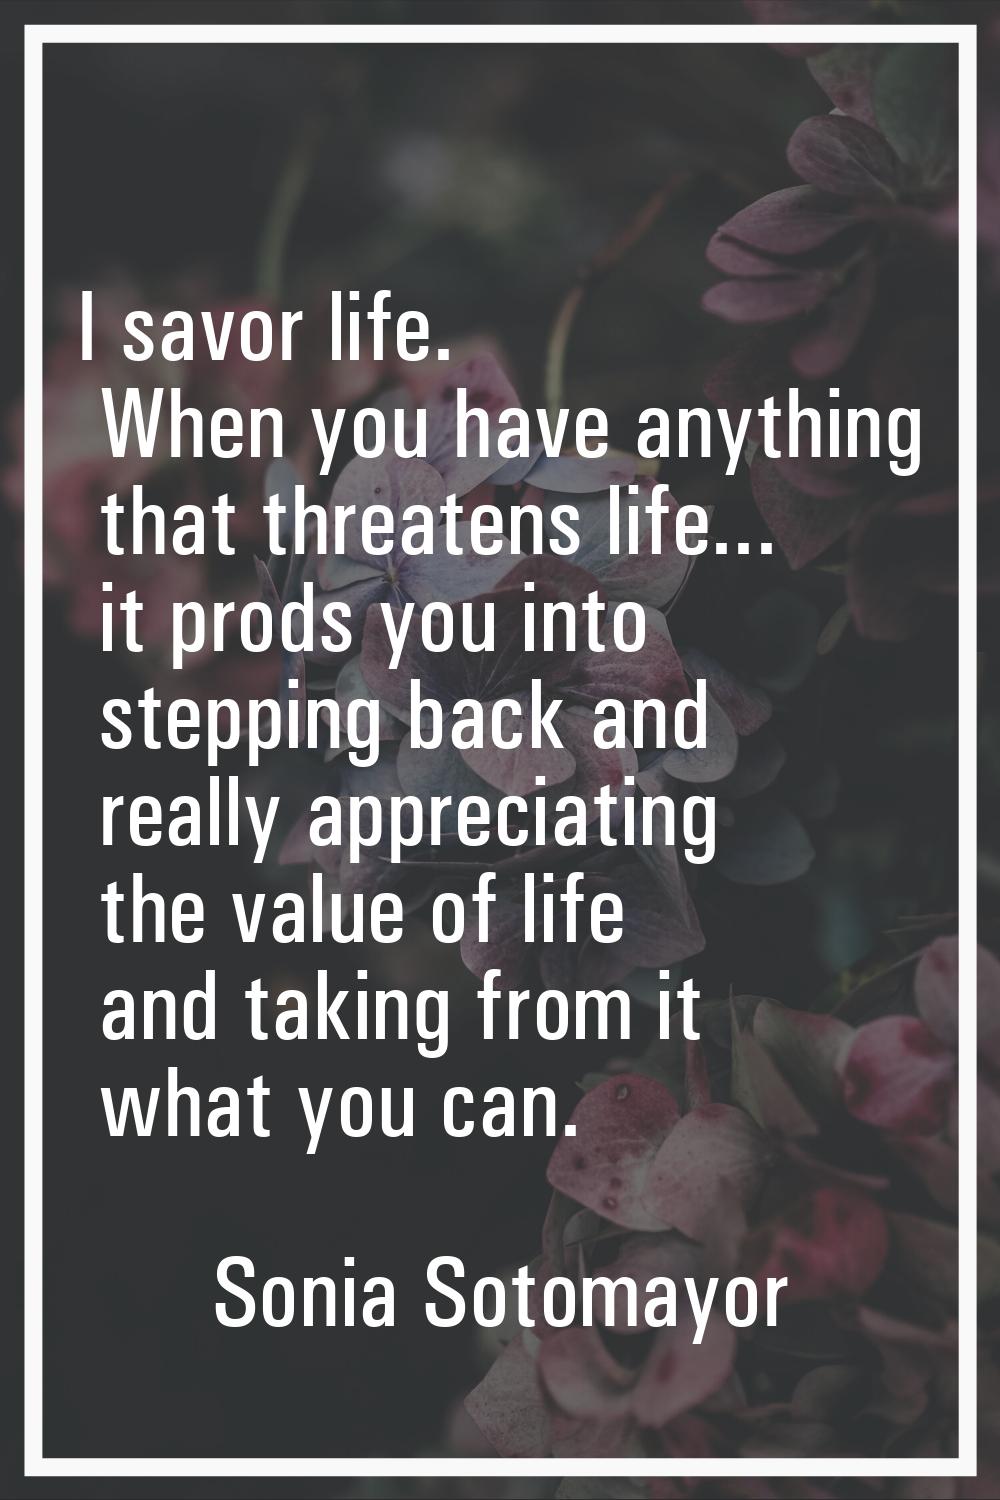 I savor life. When you have anything that threatens life... it prods you into stepping back and rea